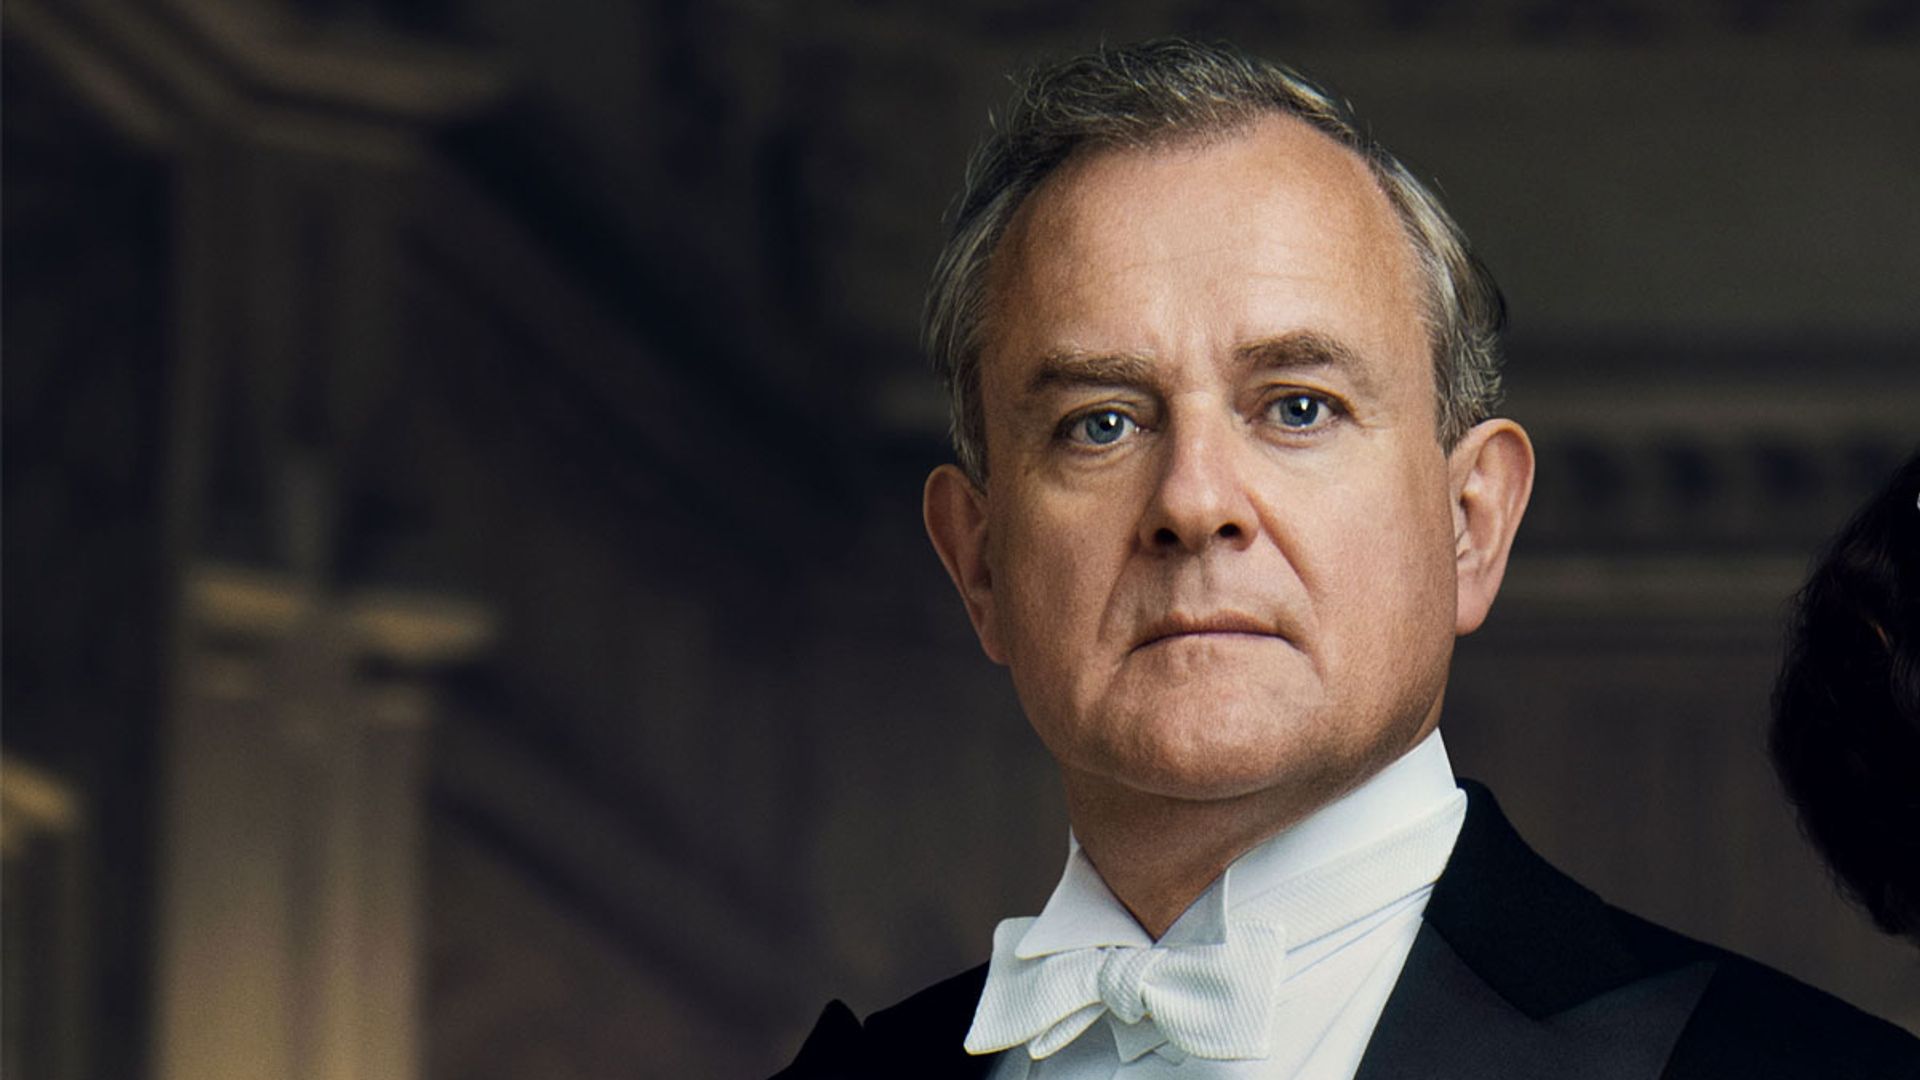 Downton Abbey's Hugh Bonneville teams up with Line of Duty star for new Netflix thriller